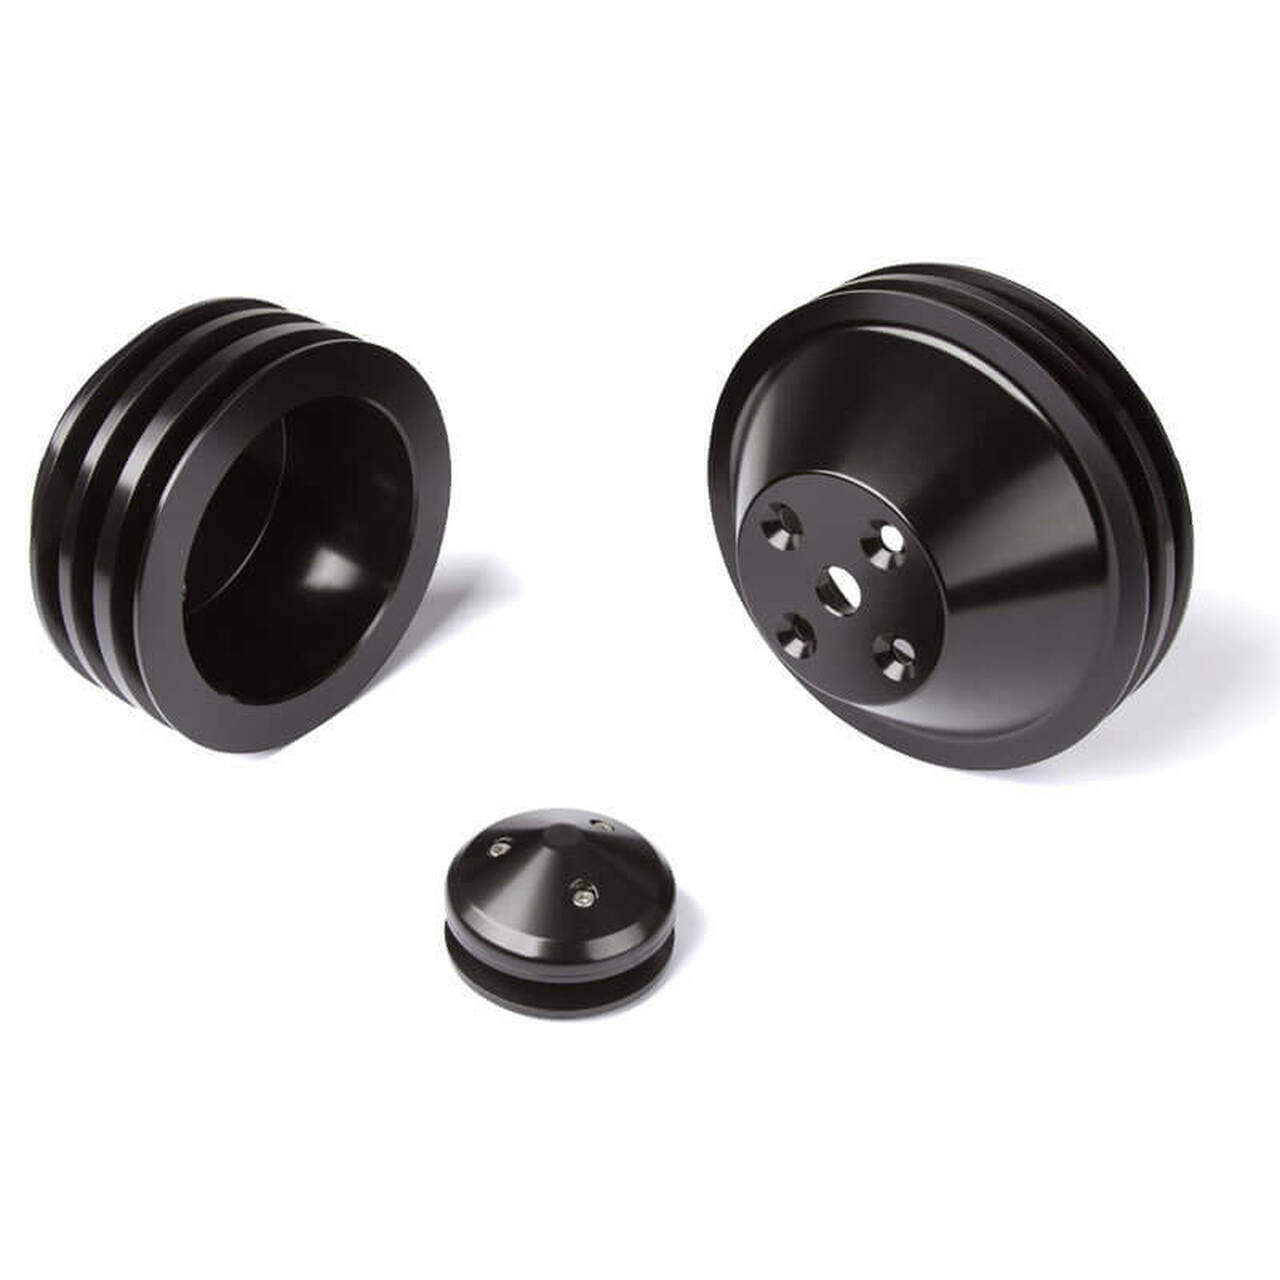 Chev 350 CVF Black 2 Row Top & 3 Row Lower Pulley Kit To Suit LWP # B-SBCL23KIT